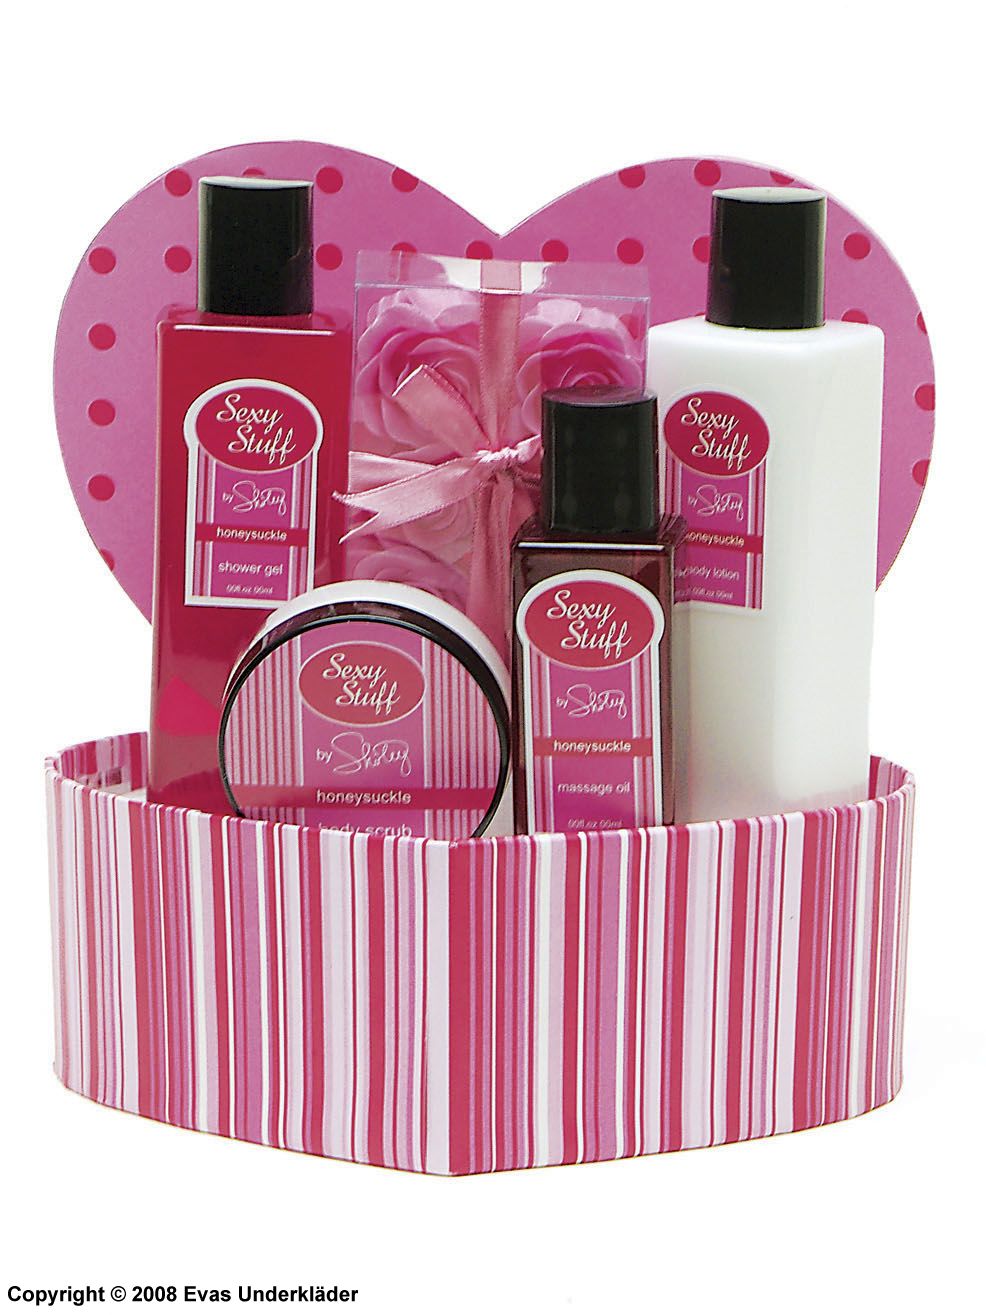 Gift set with heart of passion box